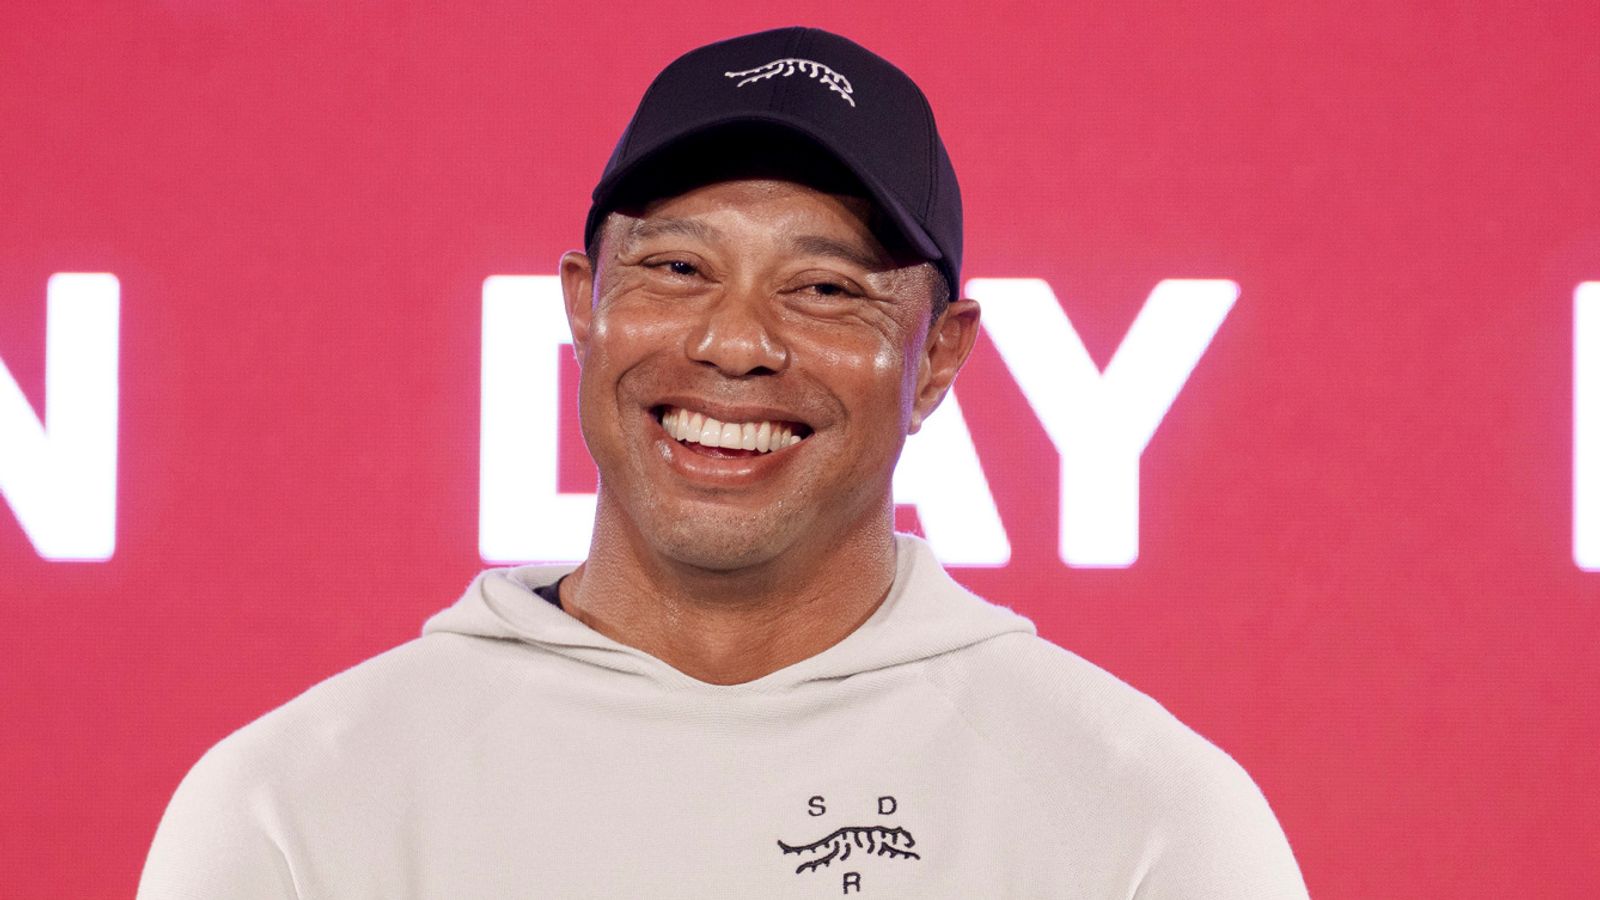 Tiger Woods launches ‘Sunday Red’ clothing and footwear line in partnership with TaylorMade after Nike switch |  Golf News